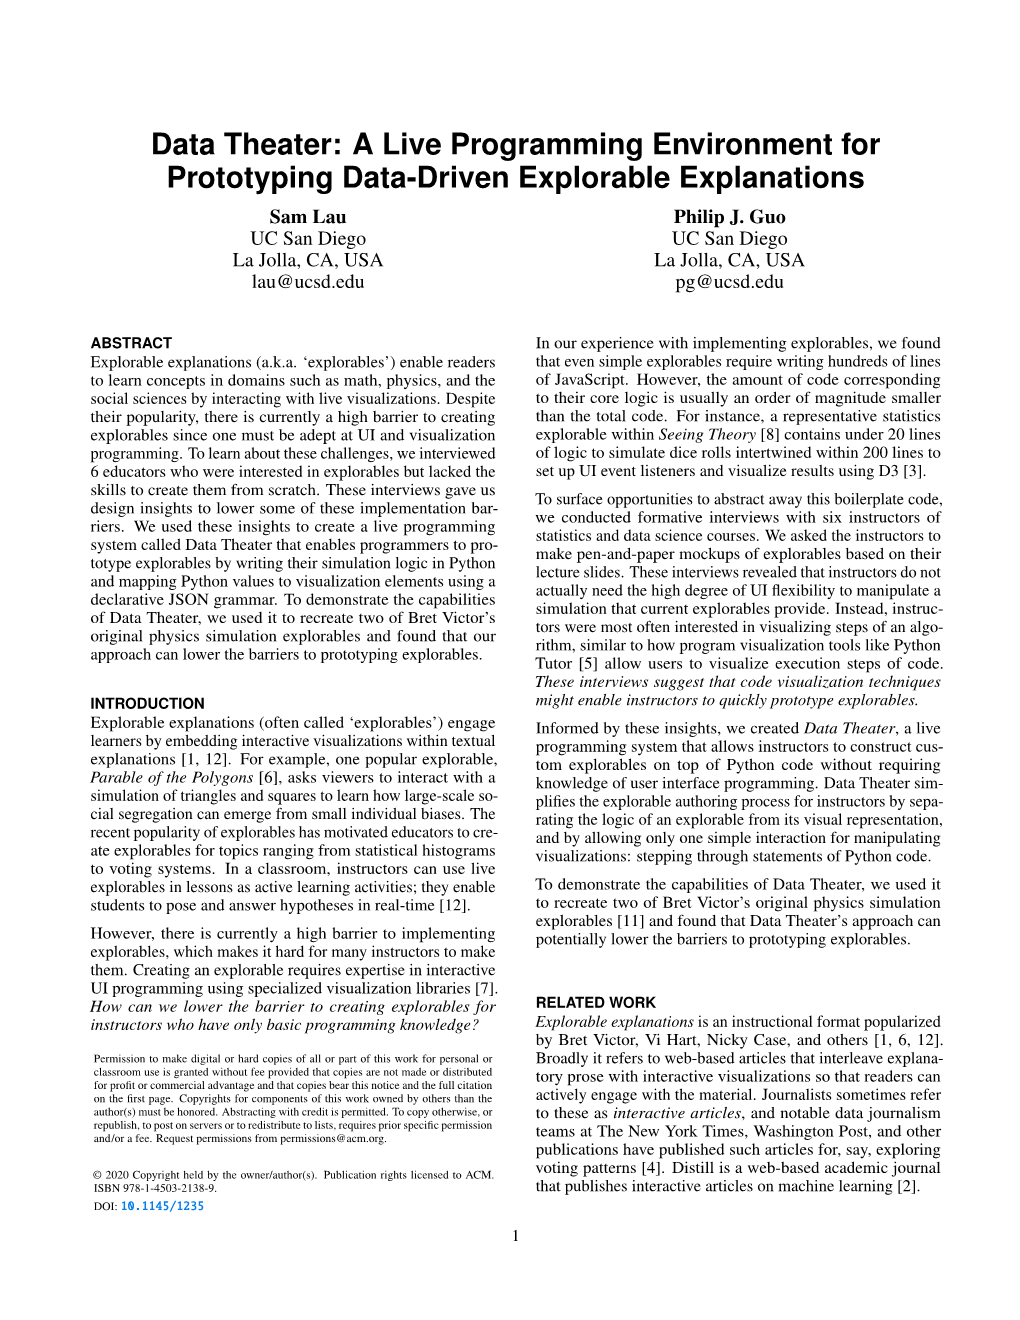 Data Theater: a Live Programming Environment for Prototyping Data-Driven Explorable Explanations Sam Lau Philip J